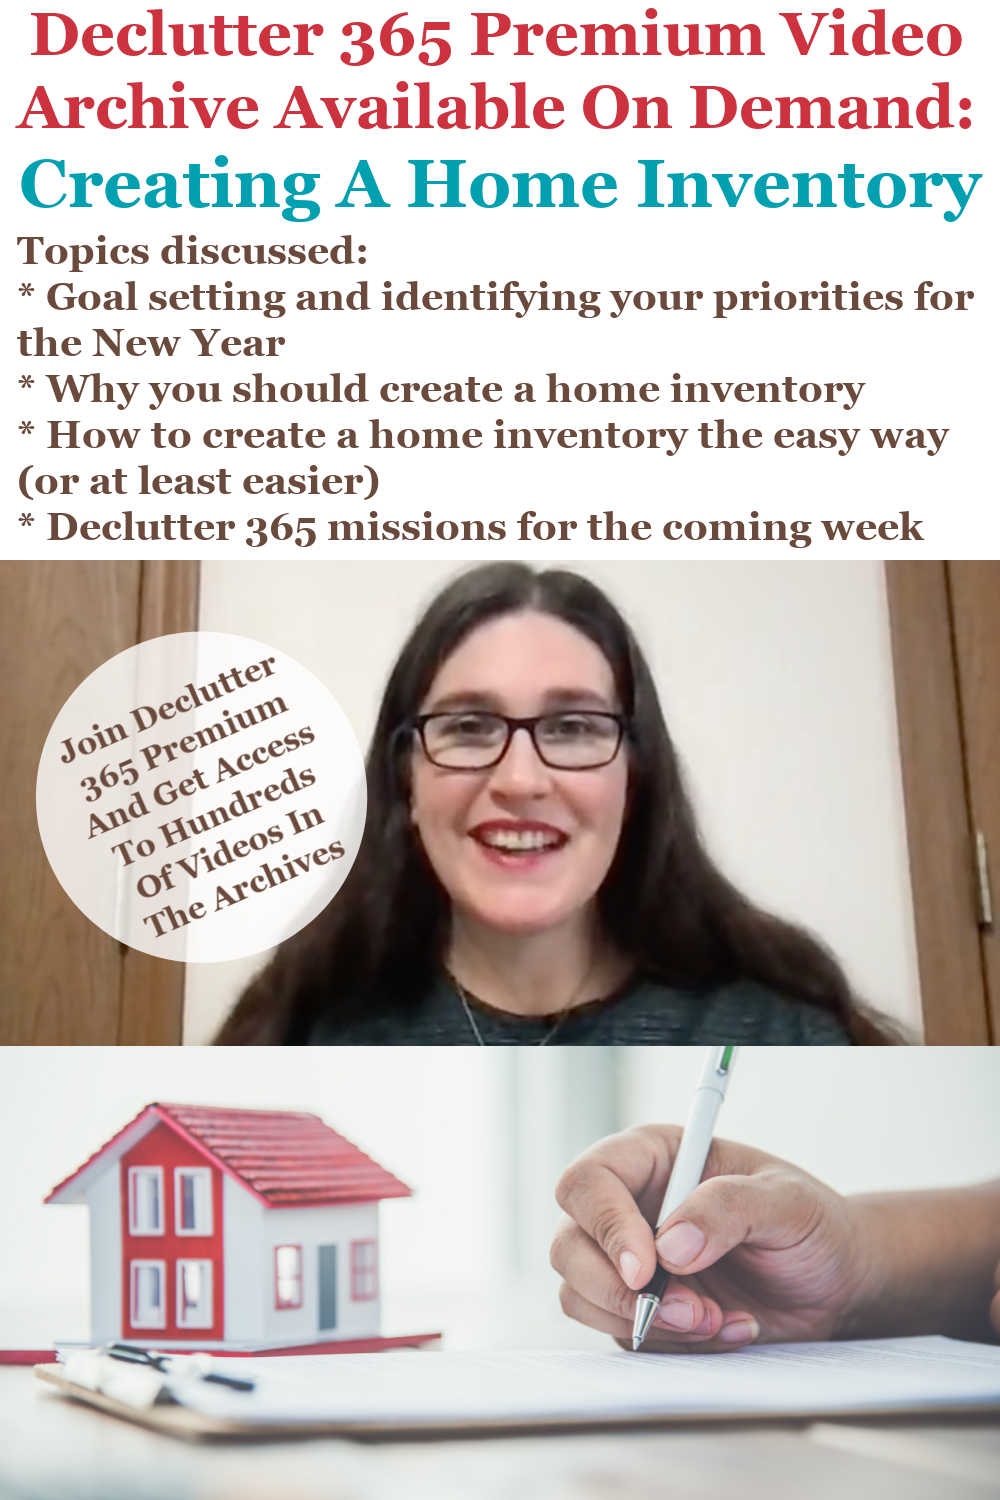 Declutter 365 Premium video archive available on demand all about creating a home inventory, on Home Storage Solutions 101